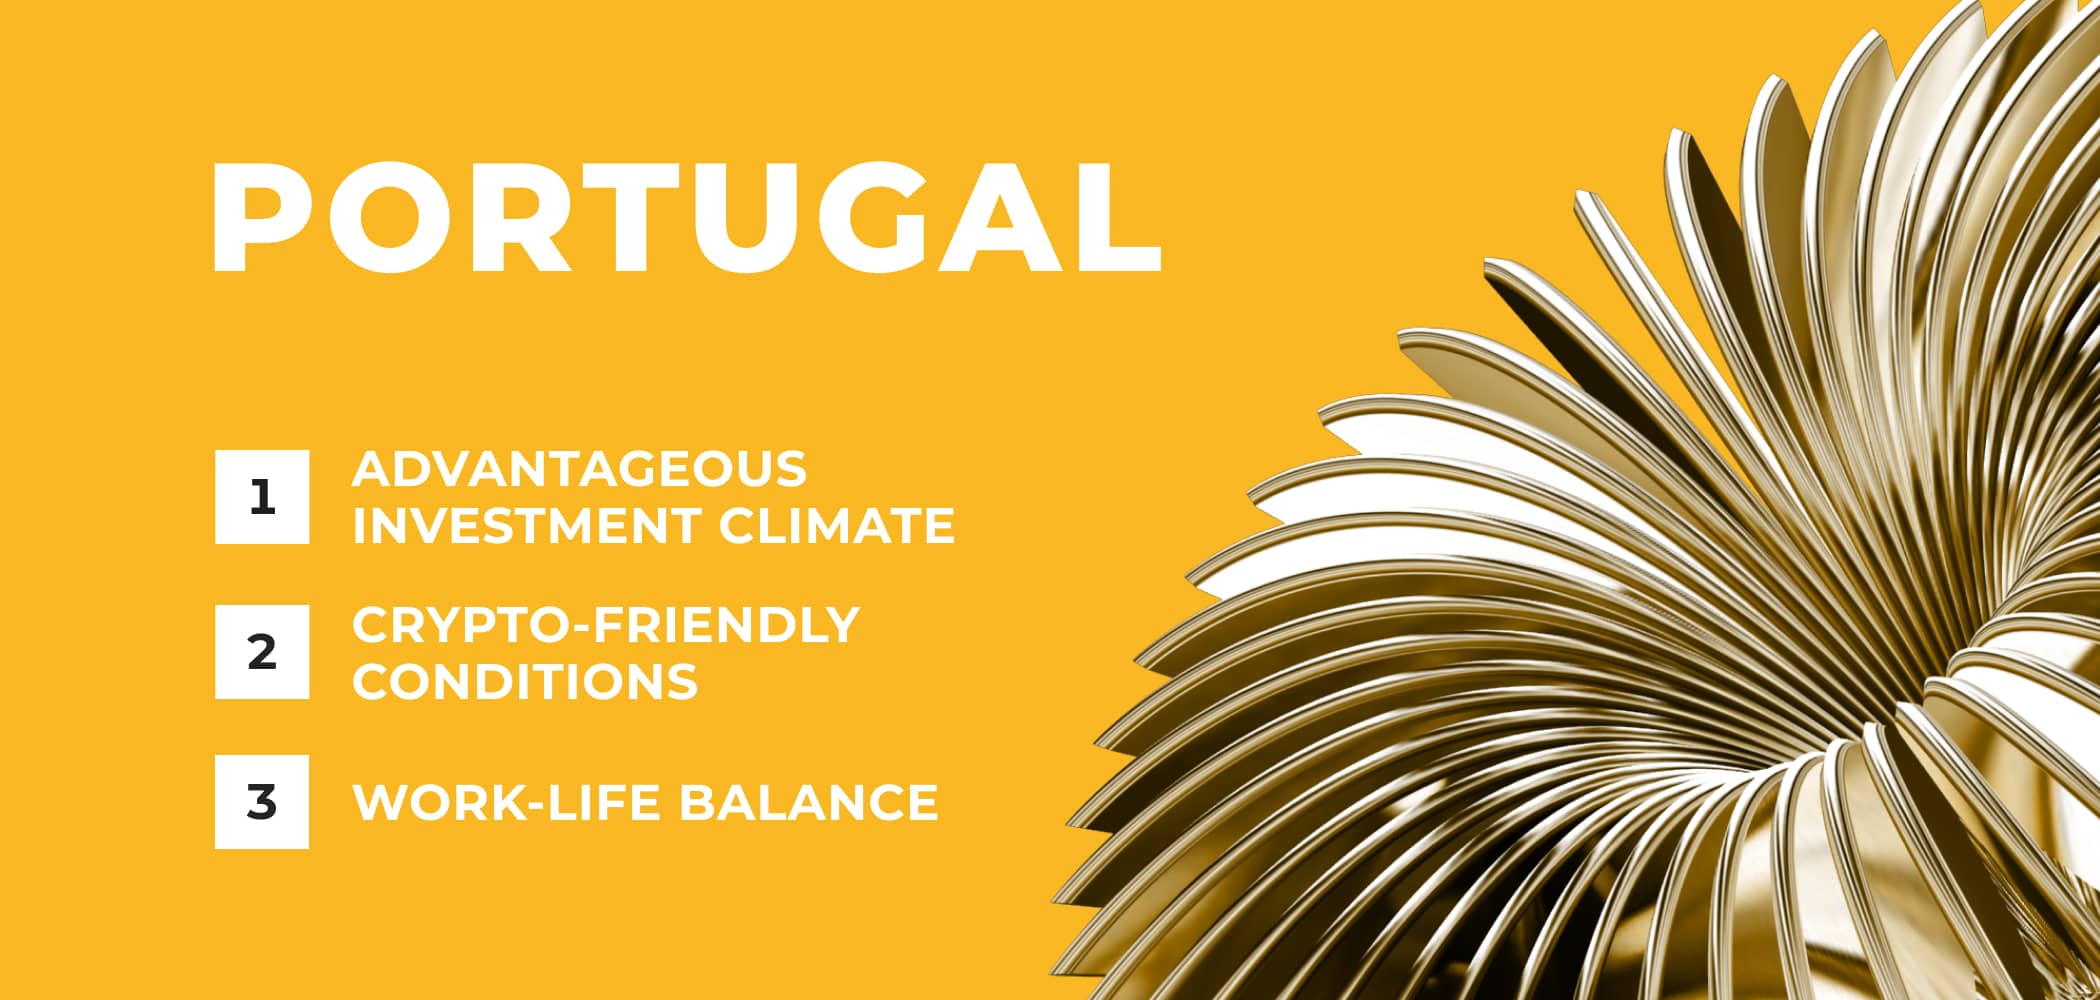 Portugal: where innovation meets lifestyle